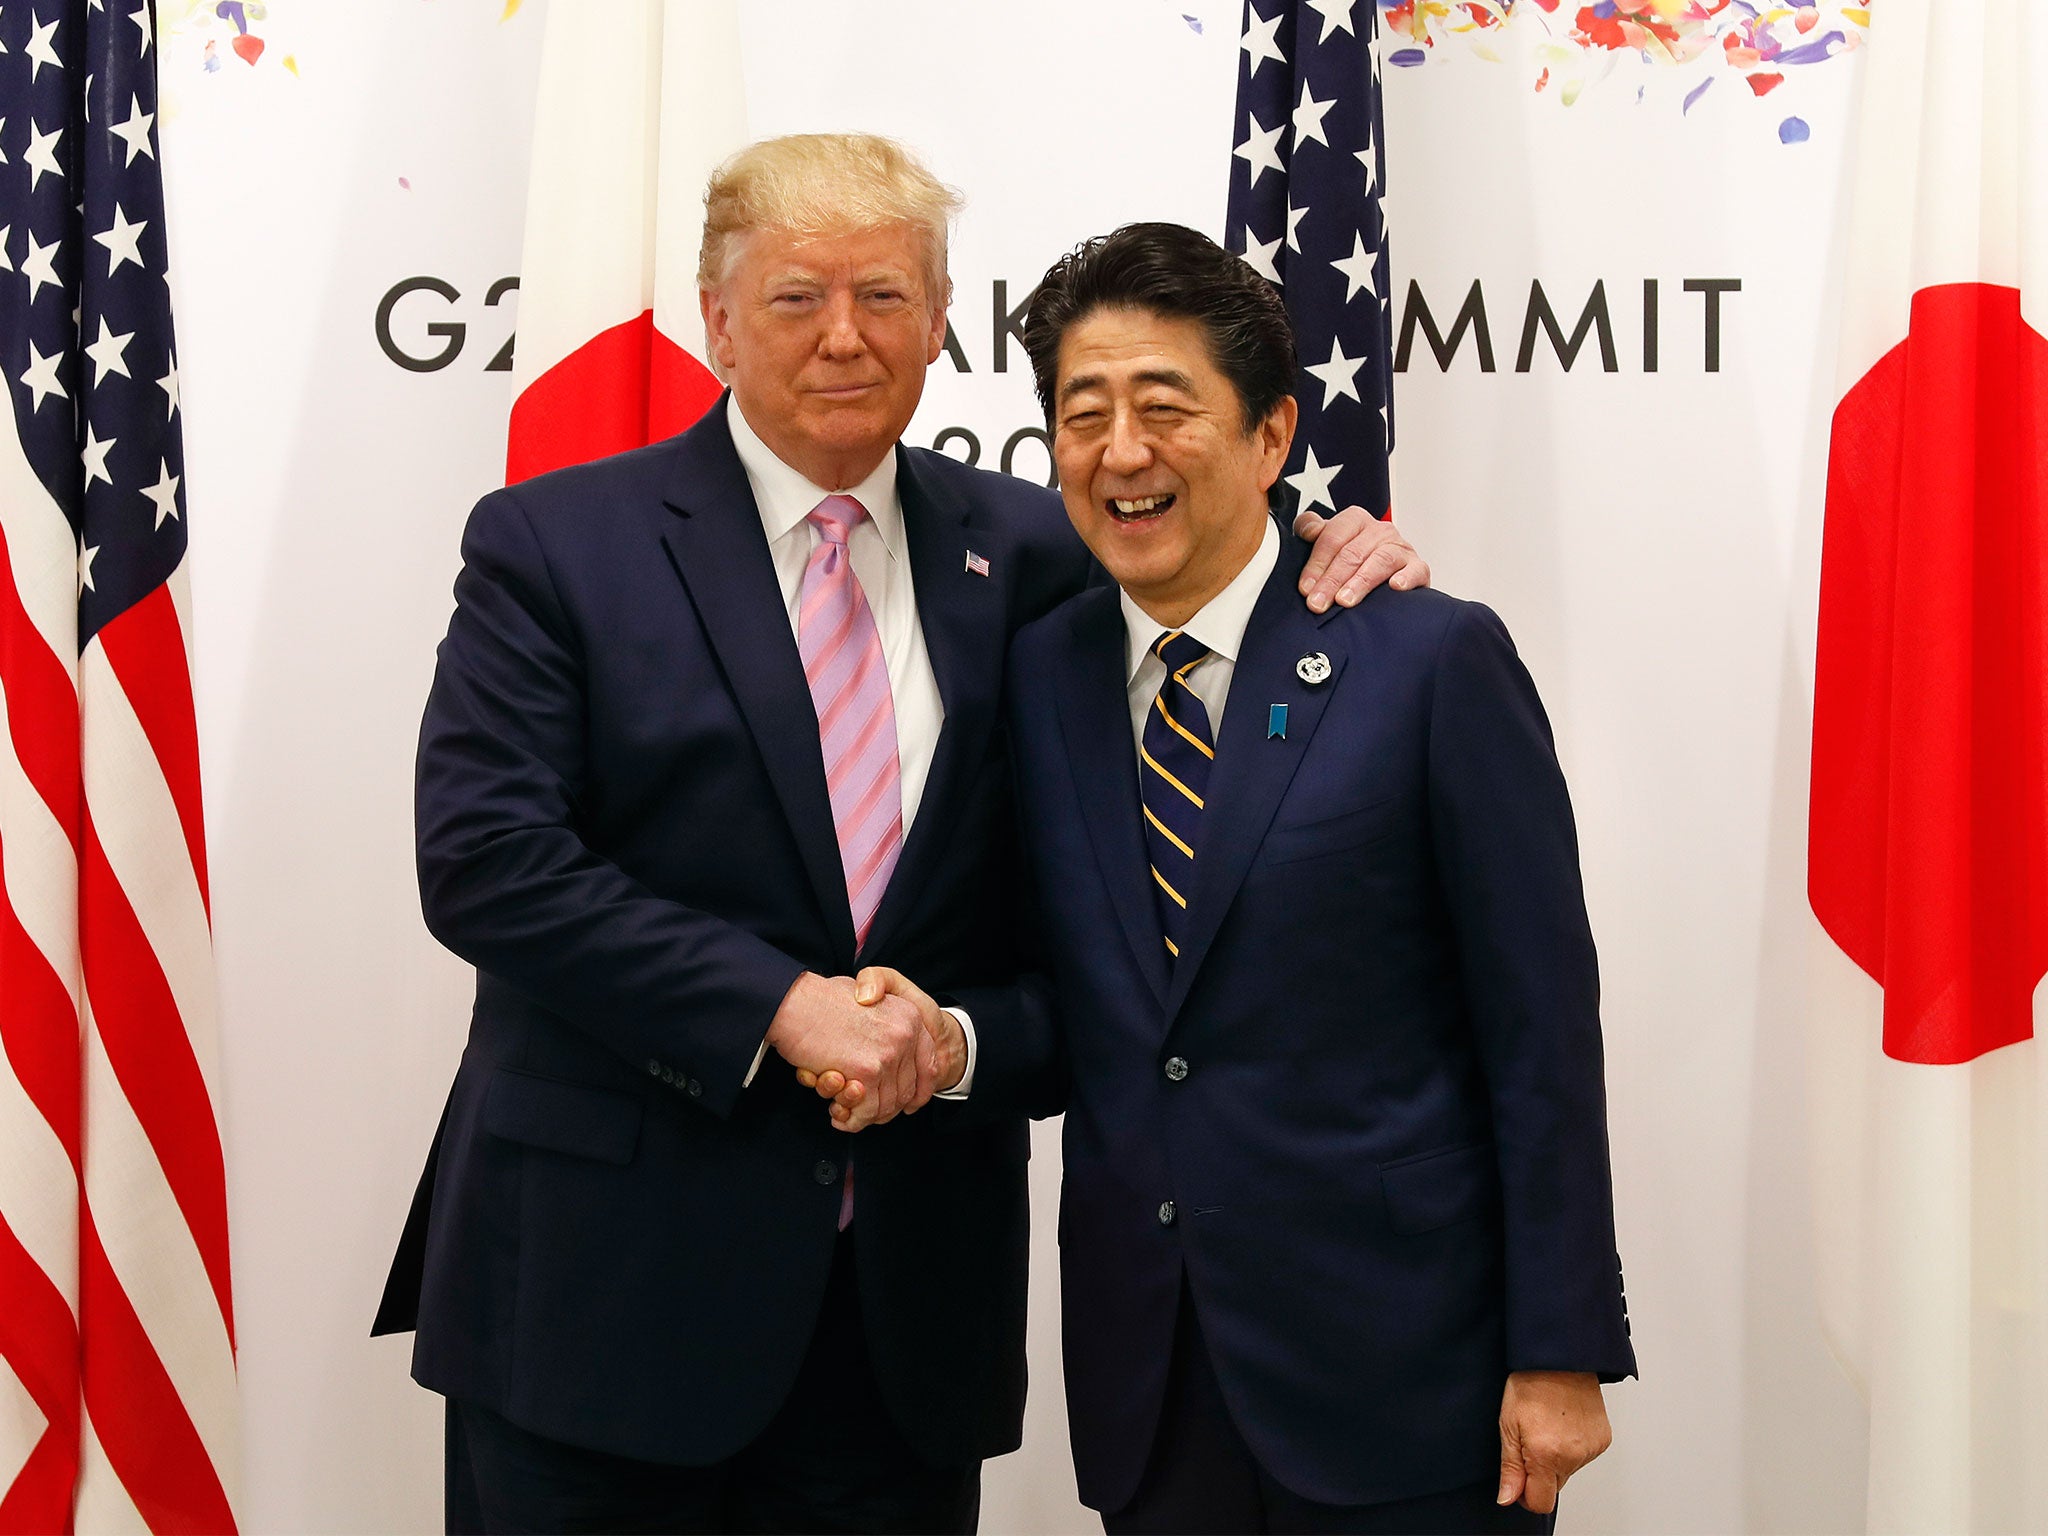 Japanese prime minister Shinzo Abe (right) says he has no concerns about relations between Tokyo and Washington